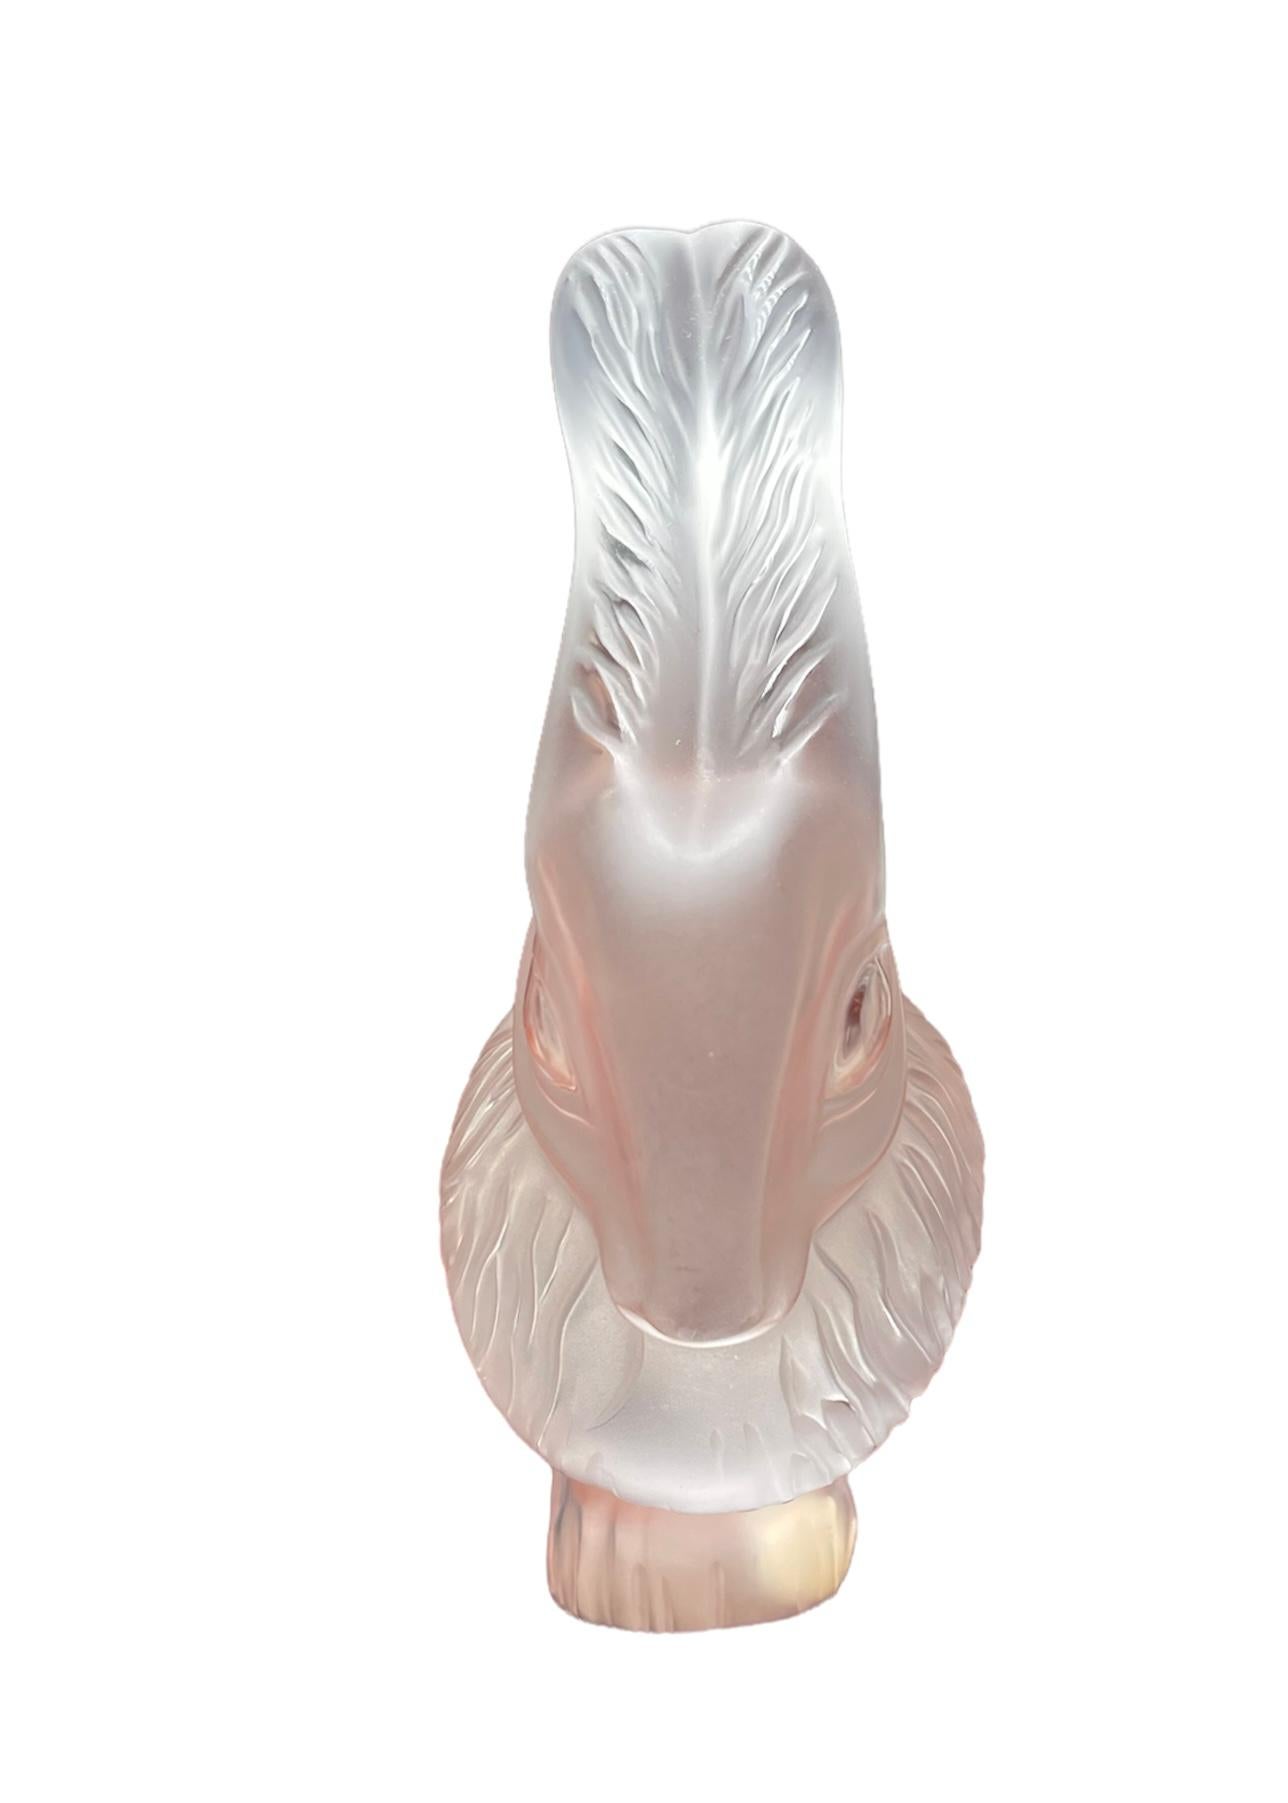 This is a Lalique frosted and clear crystal rabbit “Cesar” figurine. The rabbit is lying down with its straight up ears in alert position and very large expressive eyes. It’s body is covered with a lot of hair. Below the back of its body is the acid